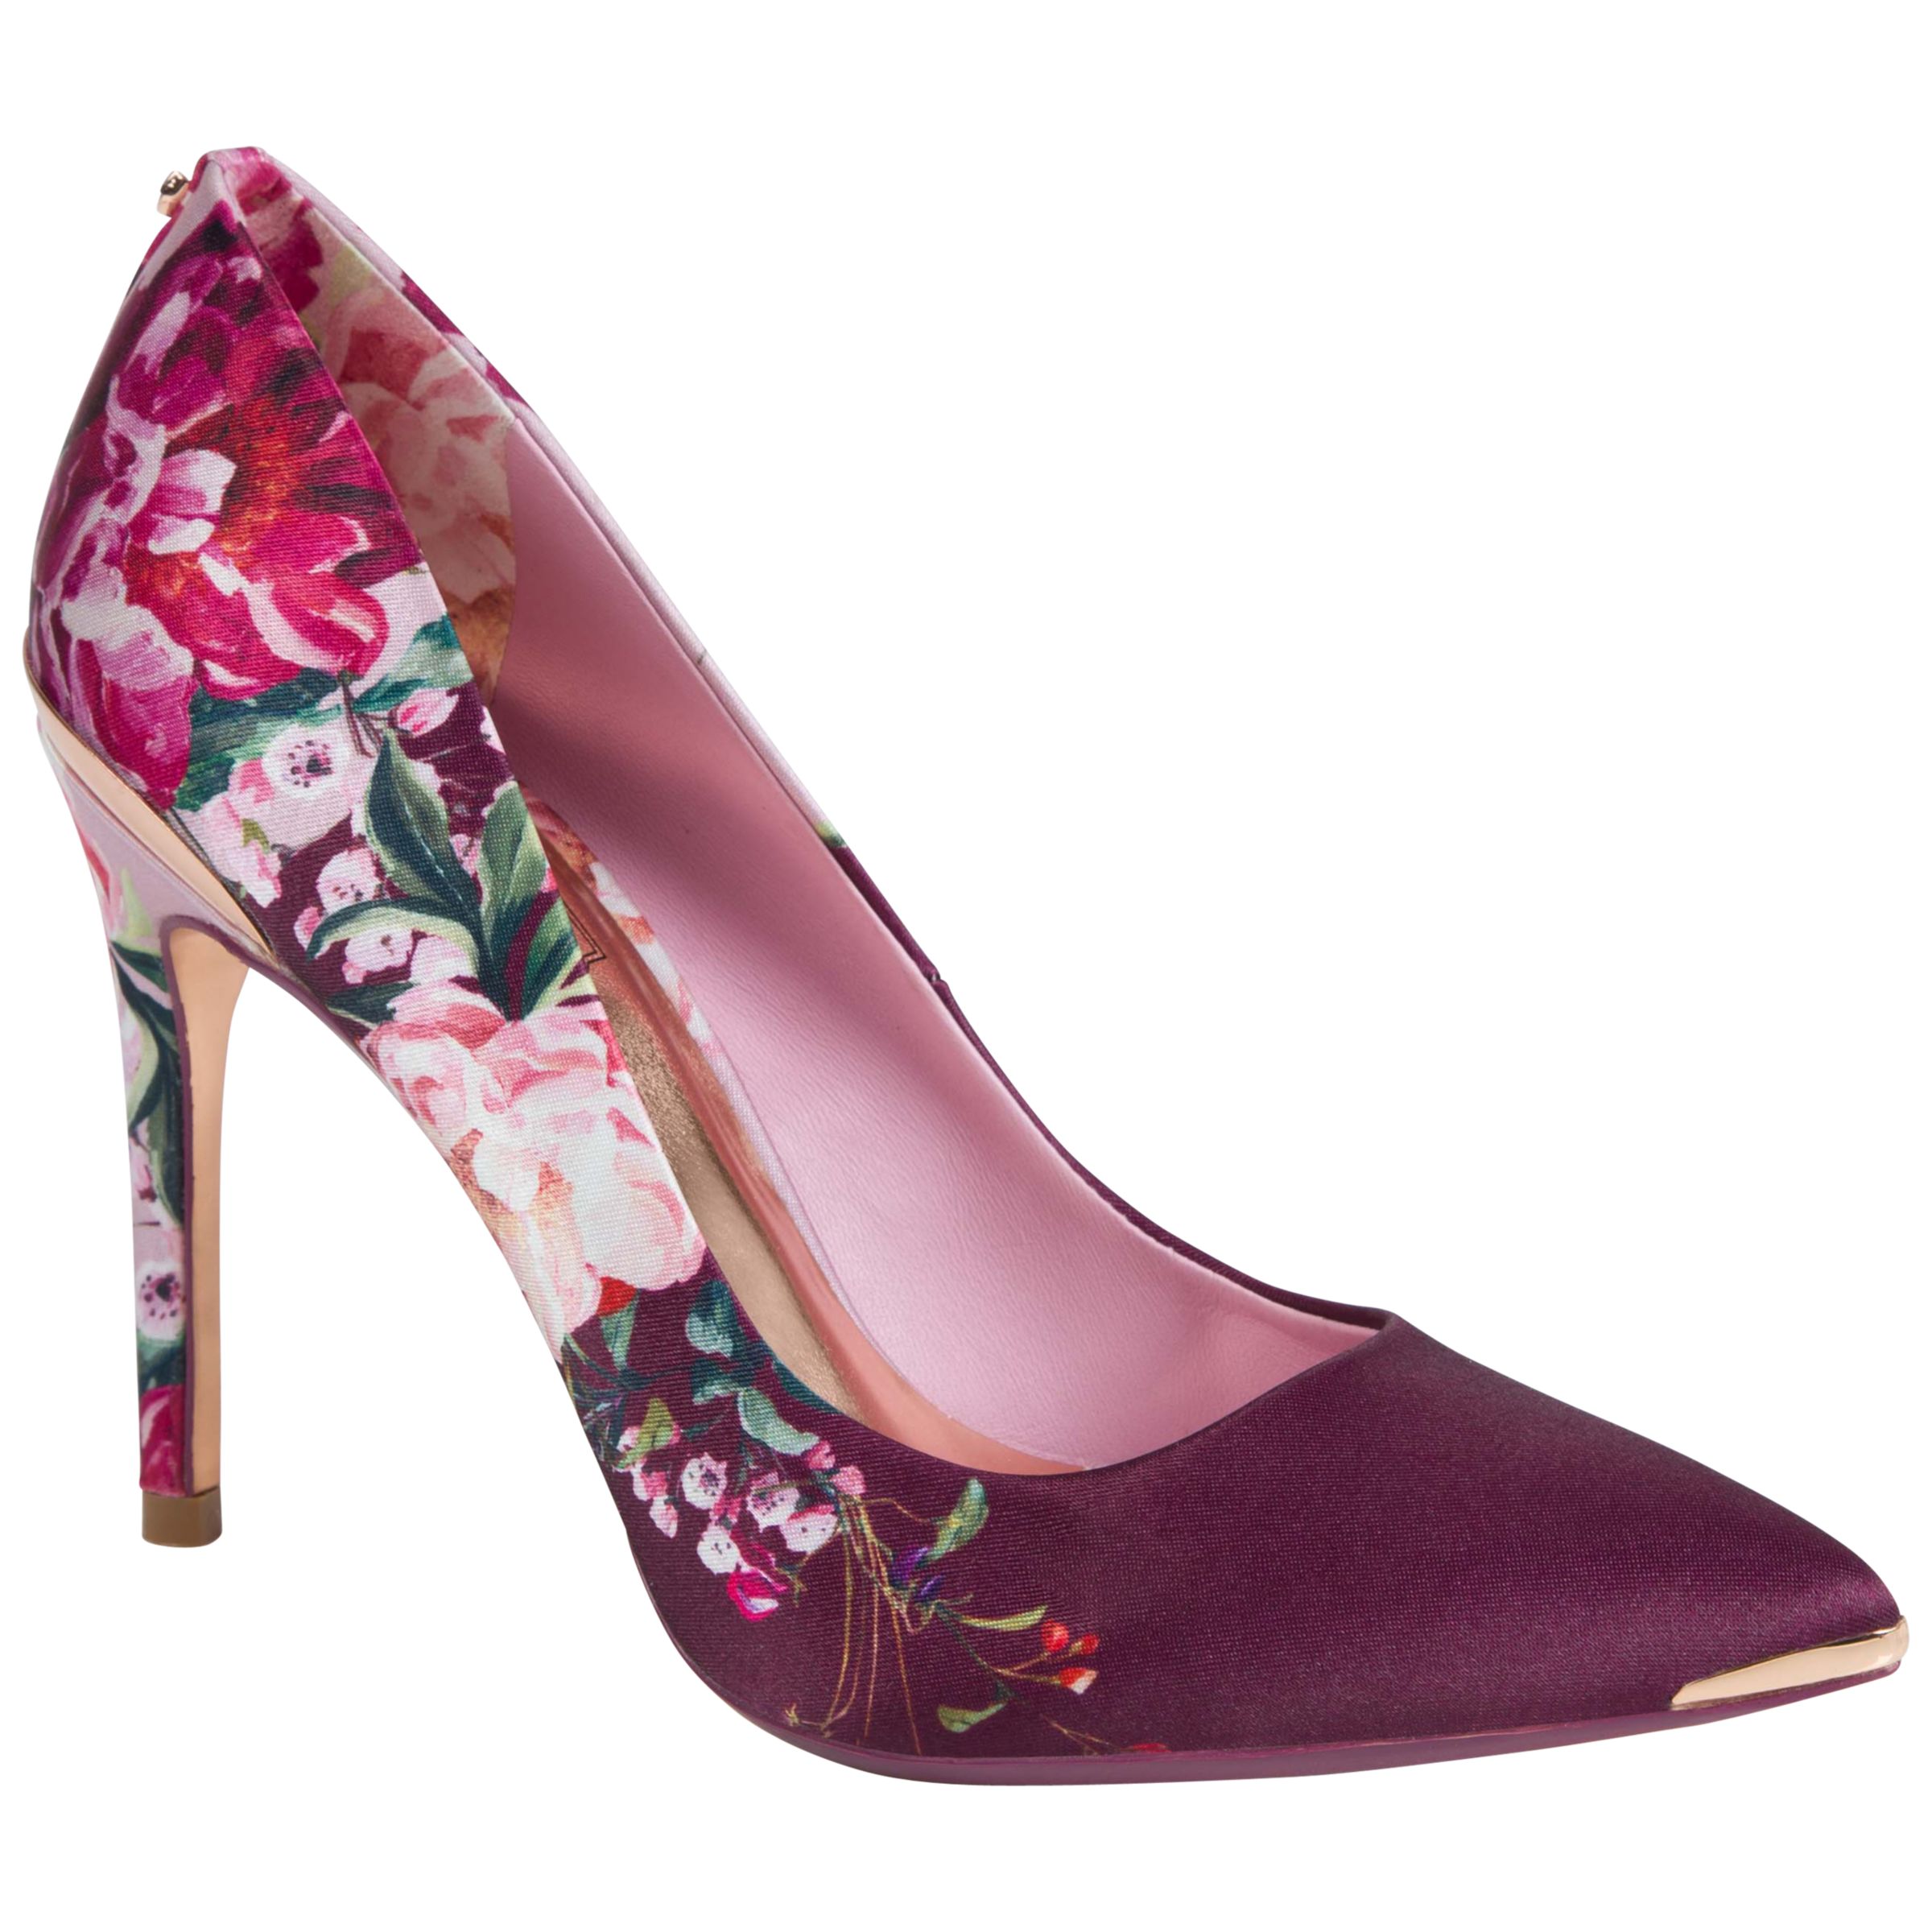 Ted Baker Kawaap Textile Heeled Court Shoes, Pink Multi, 3